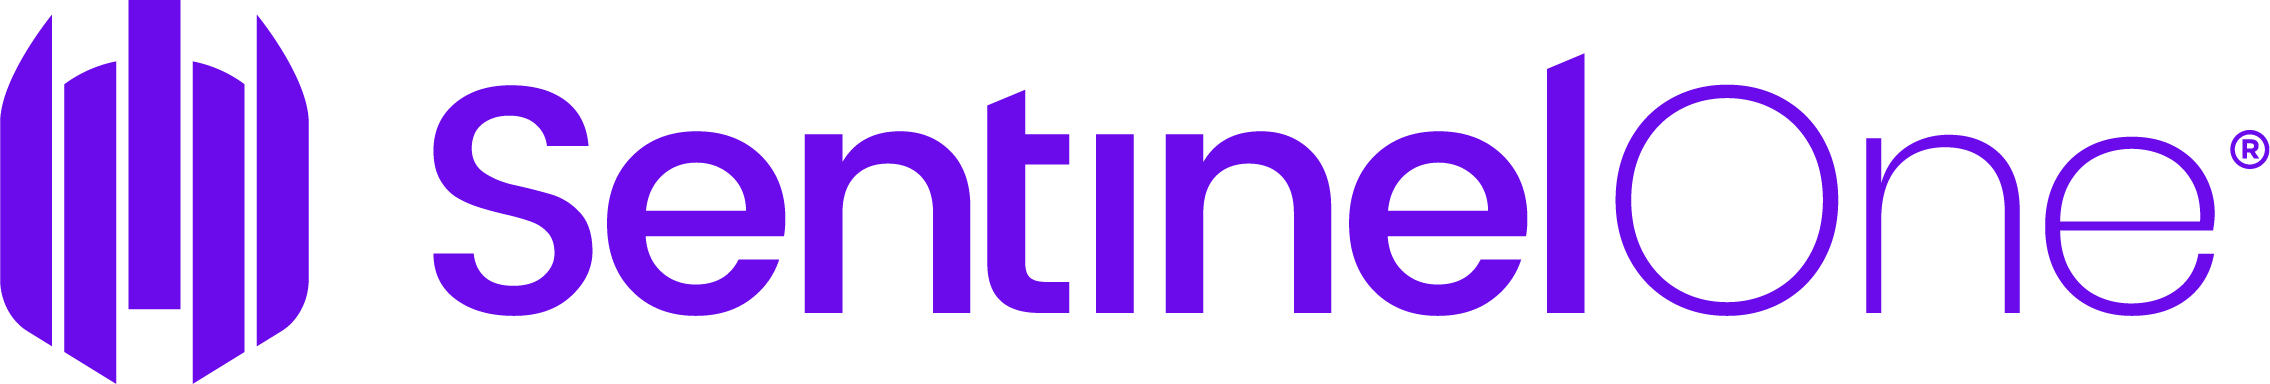 Sentinel One endpoint protection logo